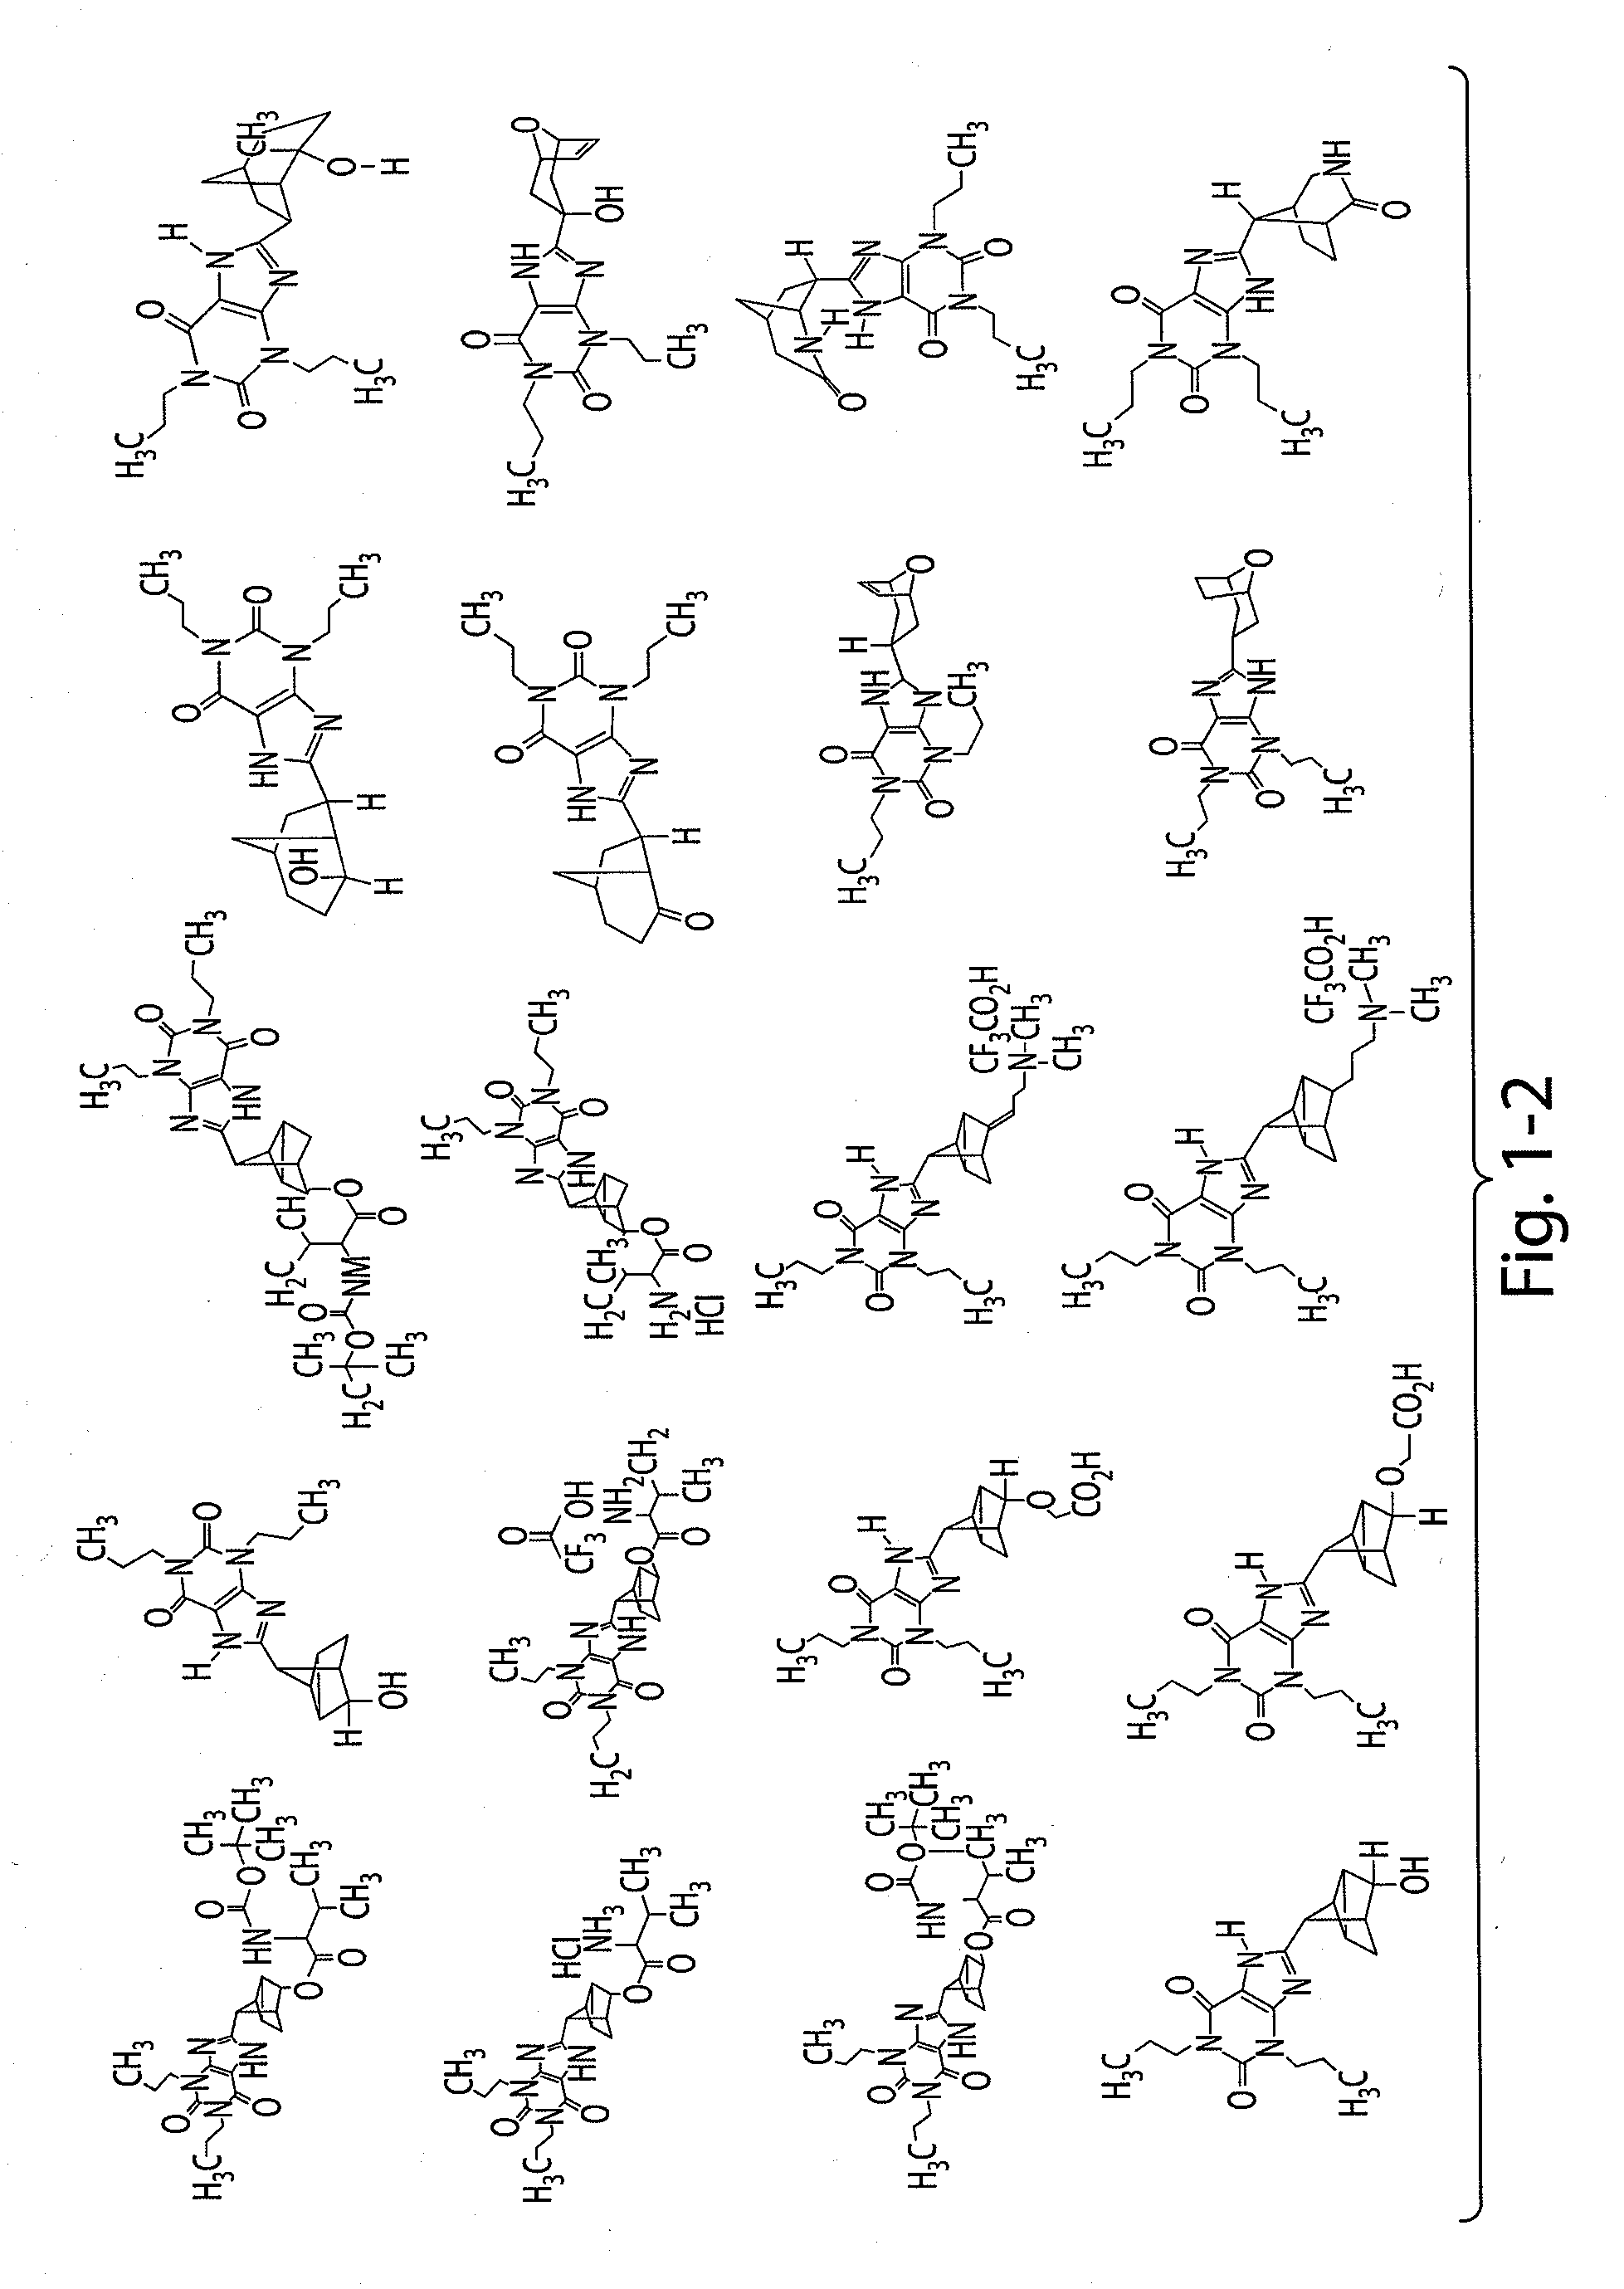 Therapeutic compositions and related methods of use